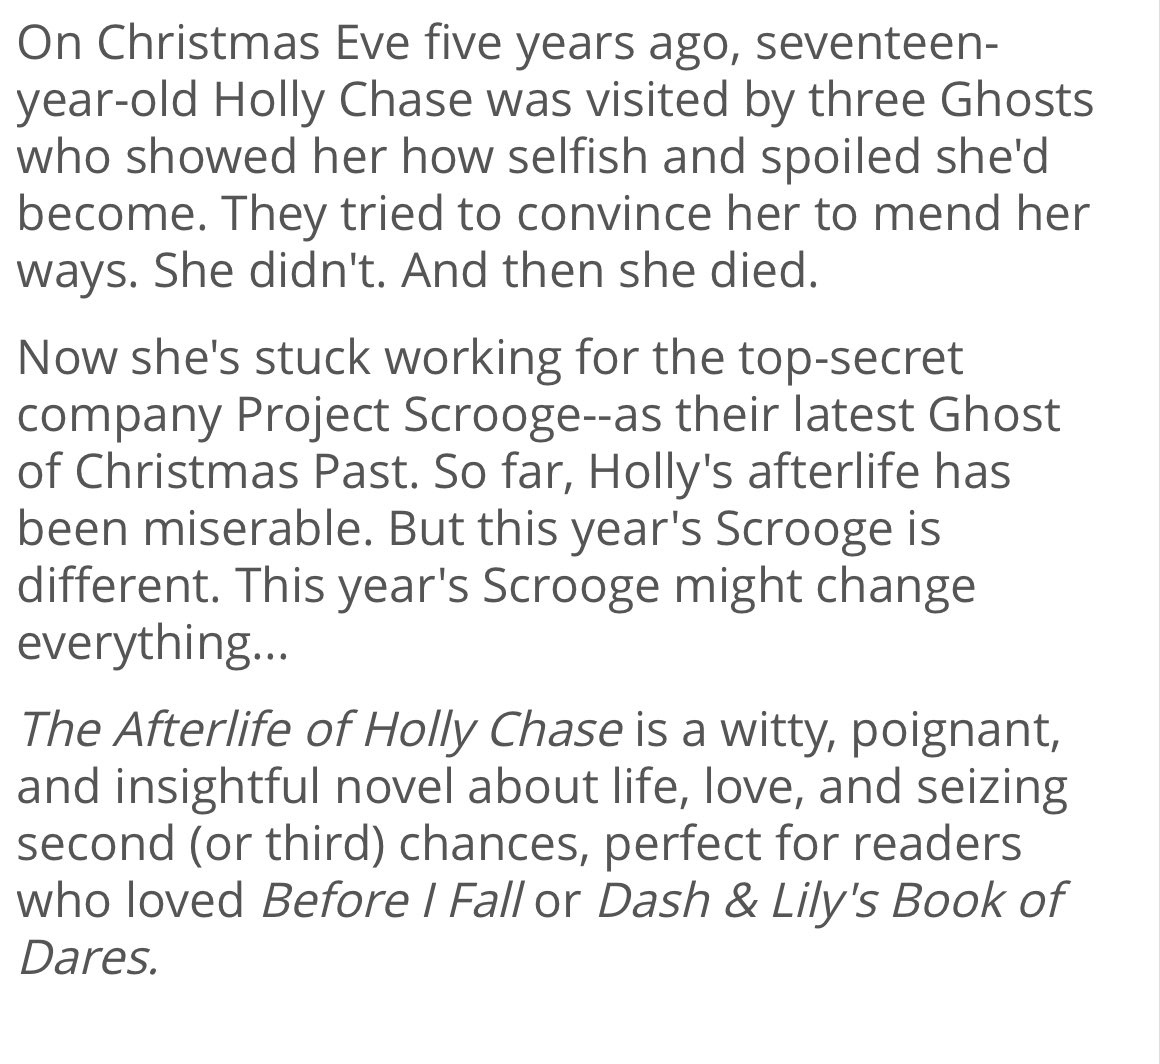 If you like a twist on a classic, this may be the book for you. Book 3 is ‘The Afterlife of Holly Chase’ by @CynthiaHand 🌟 👻